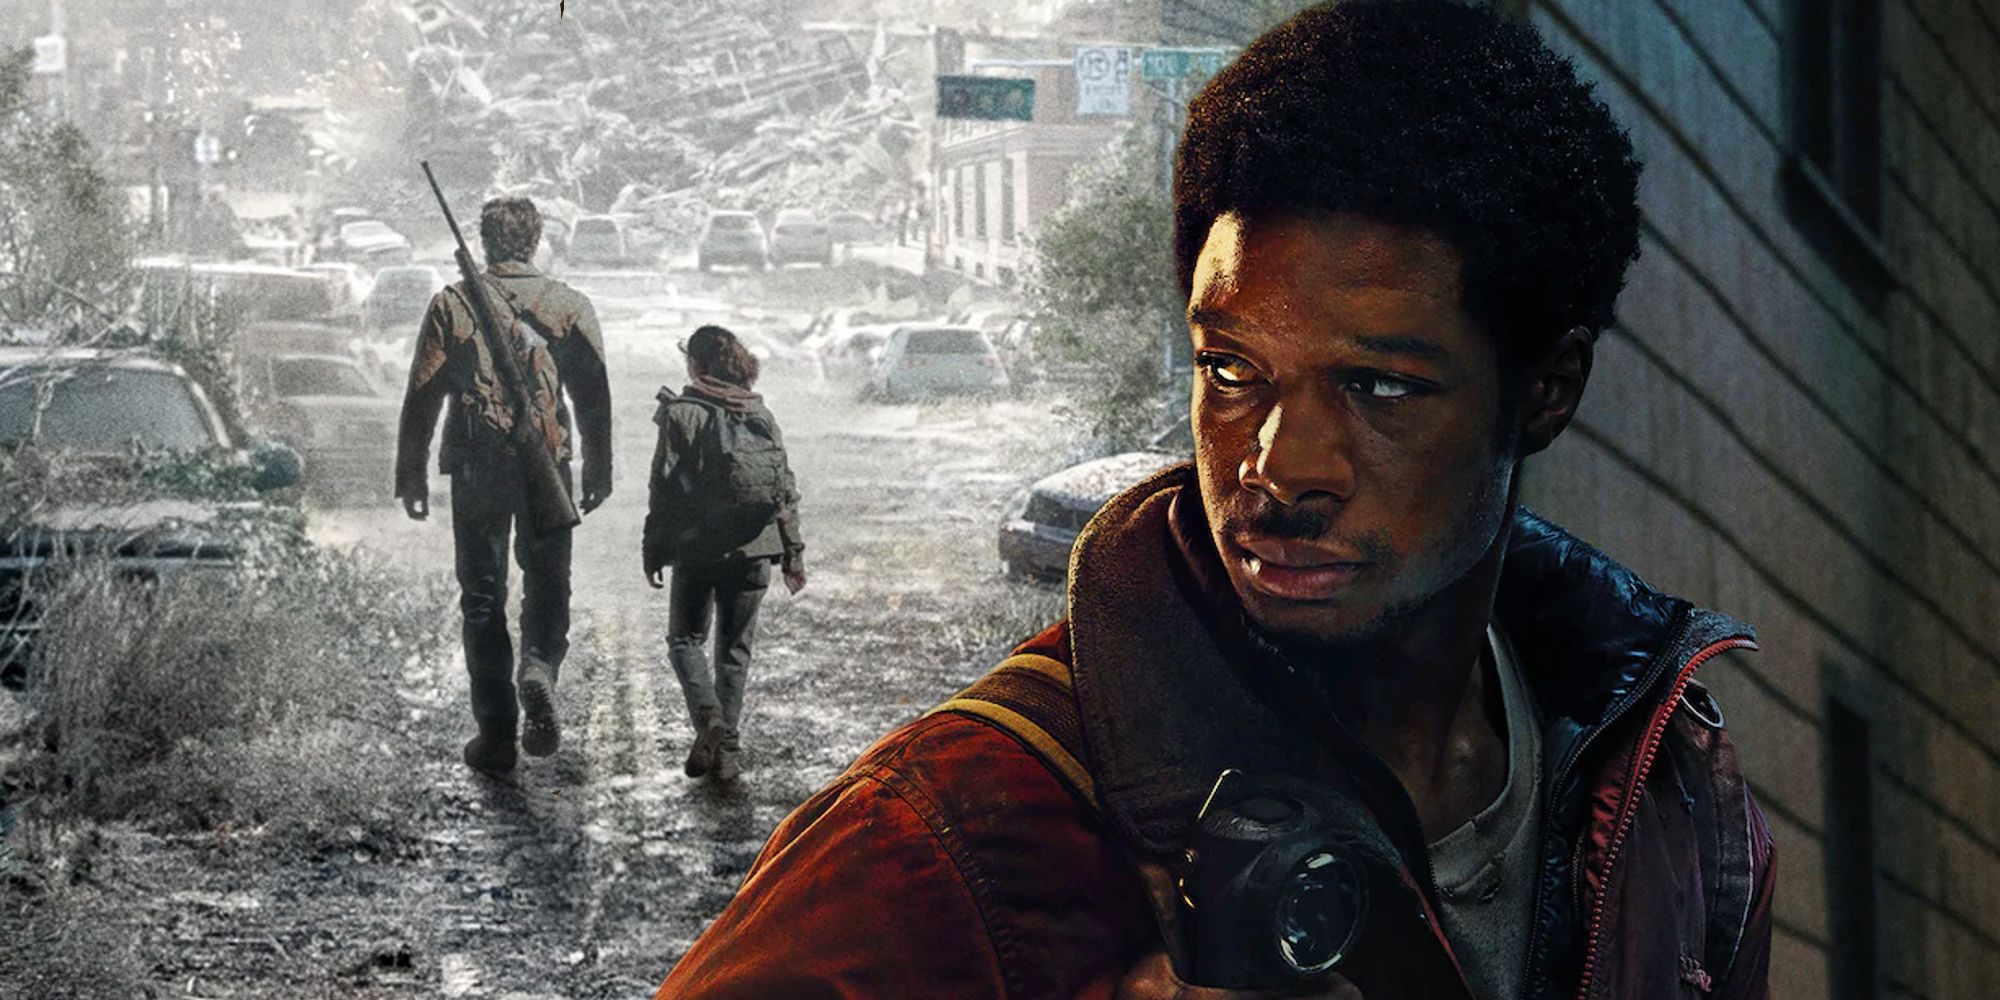 The Last of Us' HBO poster and Lamar Johnson as Henry in his official character poster